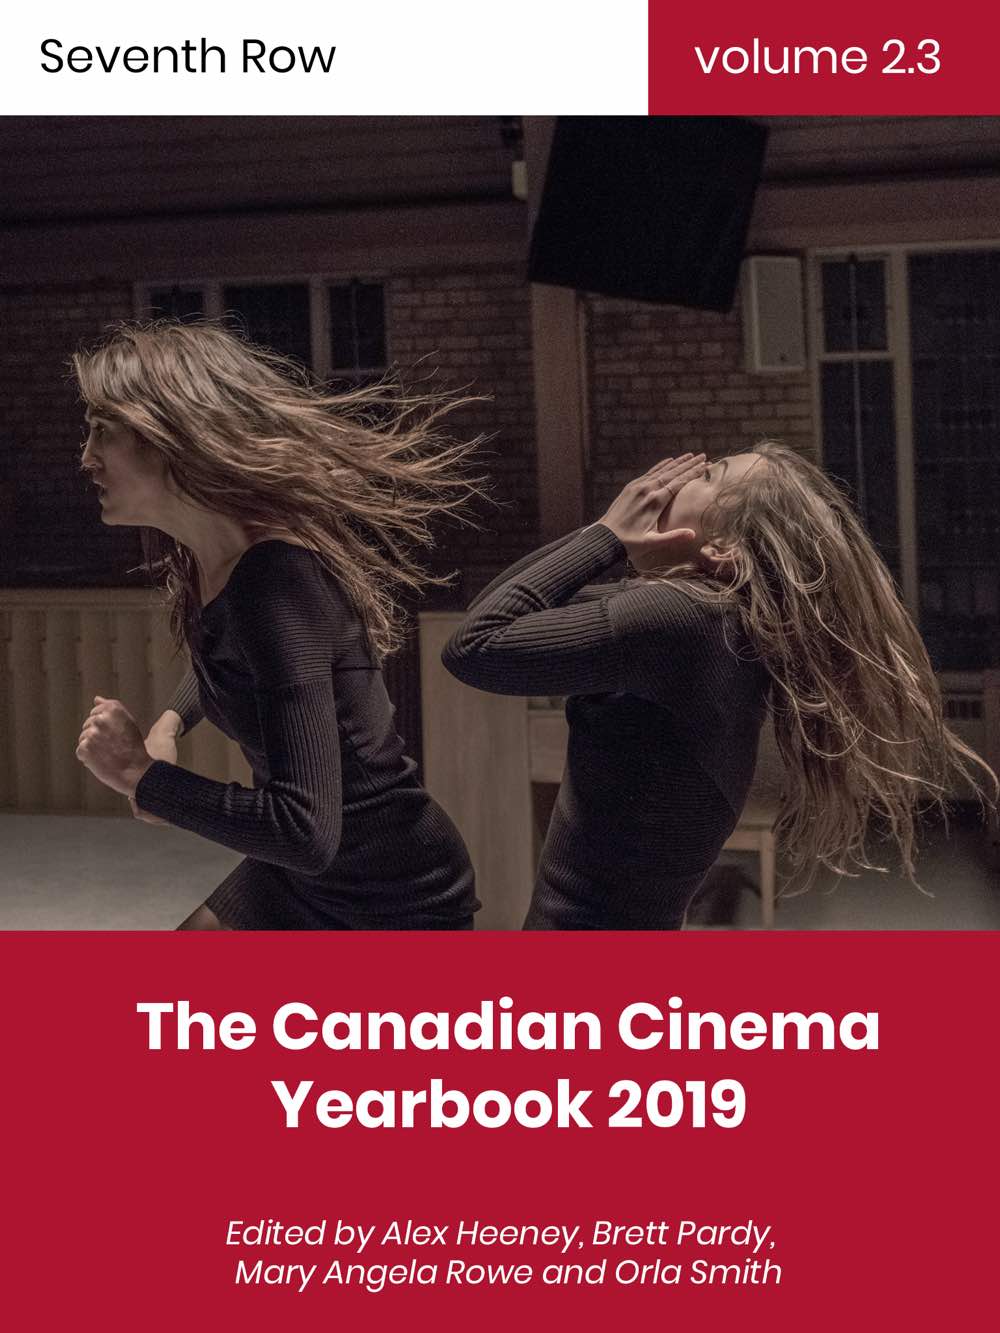 The cover of the Canadian Cinema Yearbook which contains interviews with Stéphane Lafleur's collaborators on the film Viking or on films he has edited.